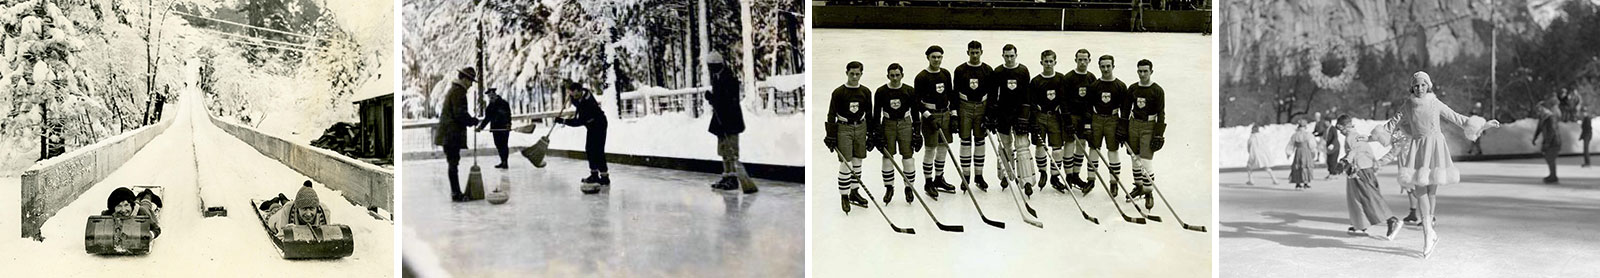 Four historic images, left to right: Two people at the end of a toboggan run, people curling in Yosemite Valley, the Yosemite Winter Club hockey team, and a young woman ice skating in fancy costume. 